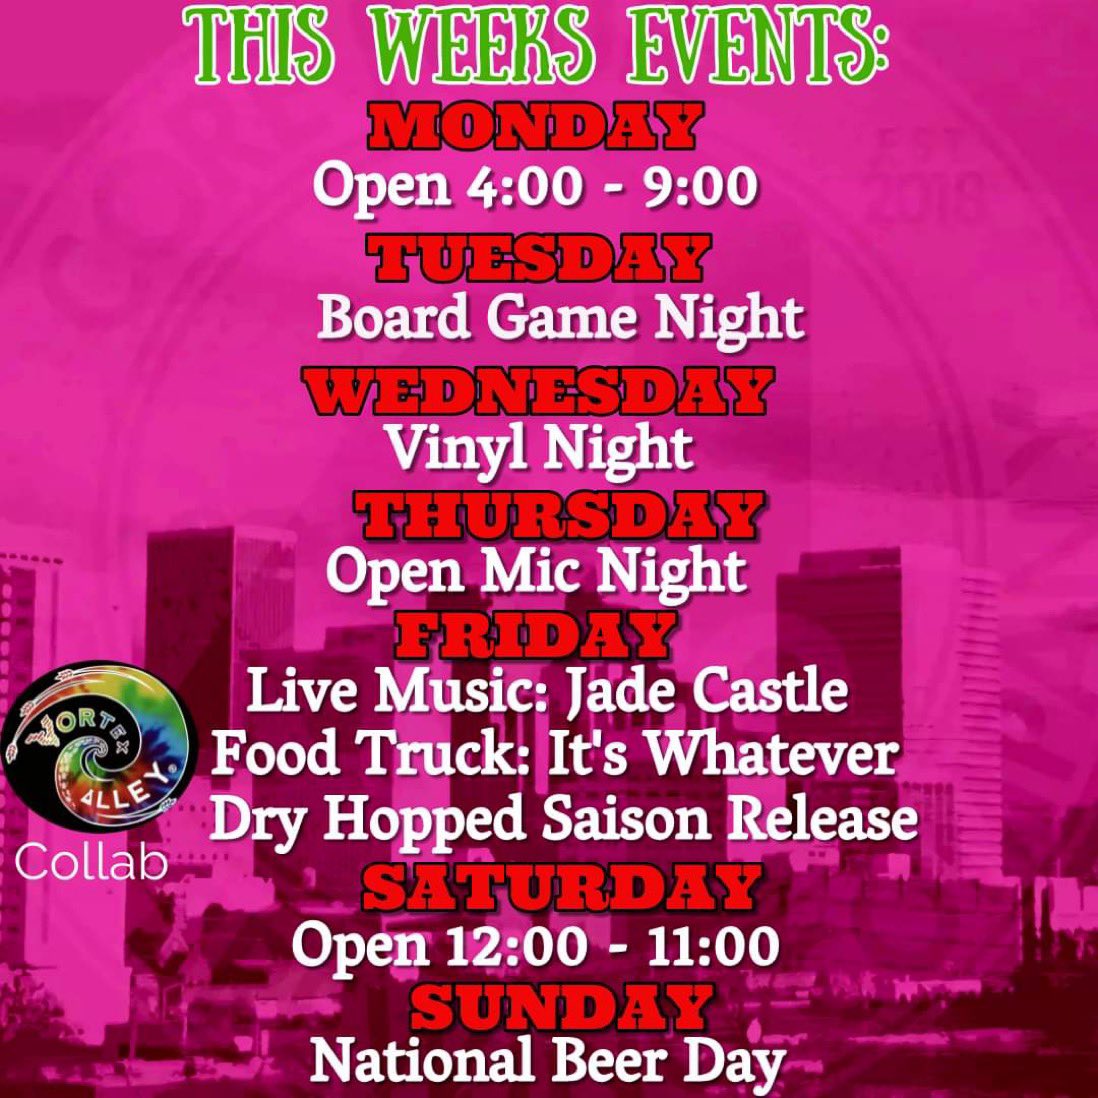 Hey OKC! Look at all the fun at Core4 this week.
Come see us soon!!
.
#core4brewing  #drinkcore4 #filmrowokc #downtownokc #visitokc #alwaysaparty #drinklocal #westvillageokc #SeeOKC #comefortheparty #stayforthebeer